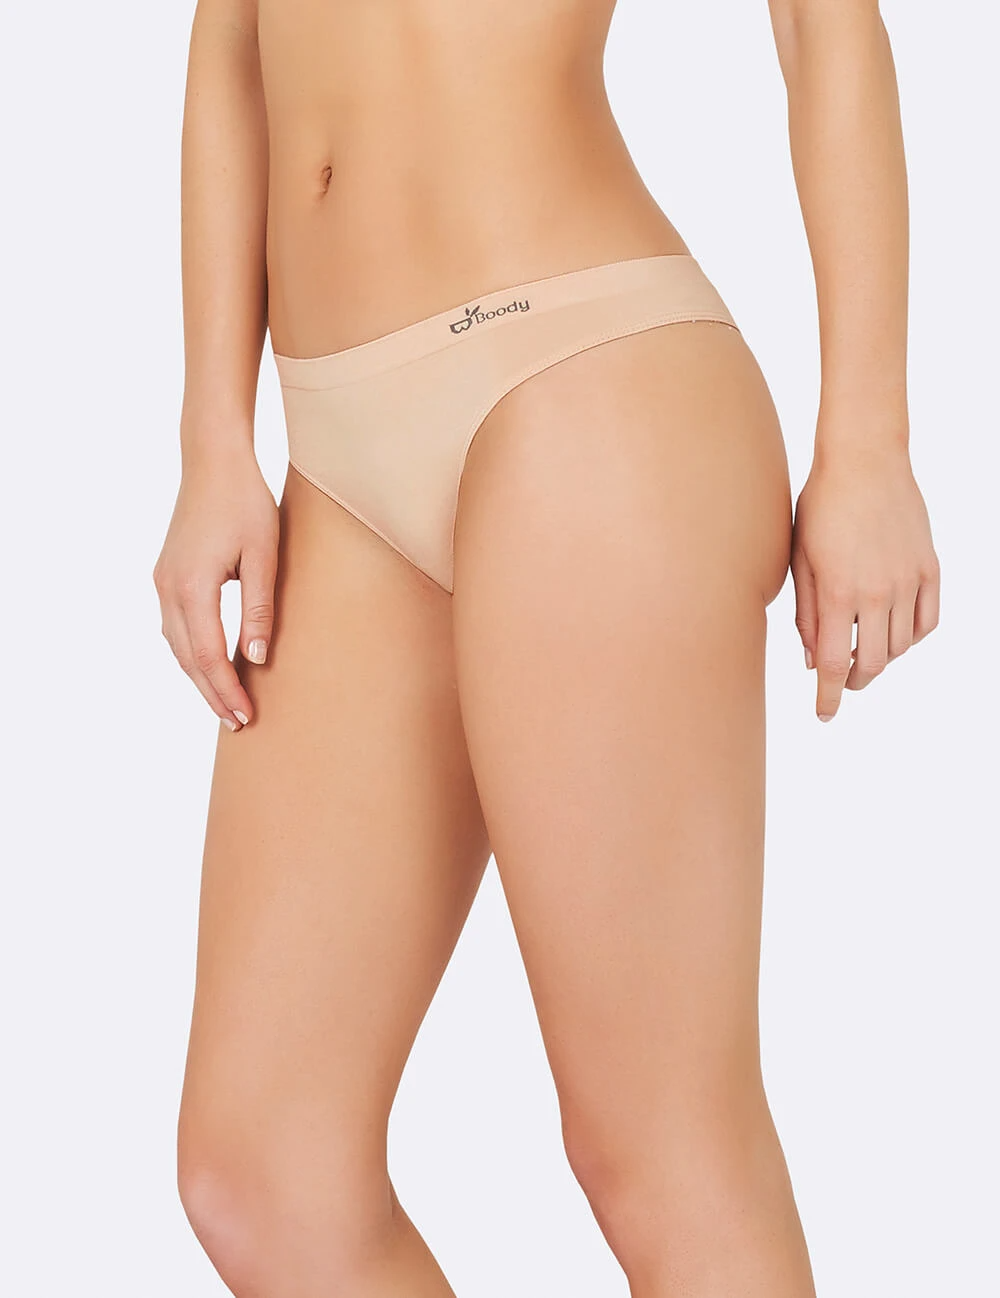 Toned High G-String – Bamboo Underwear